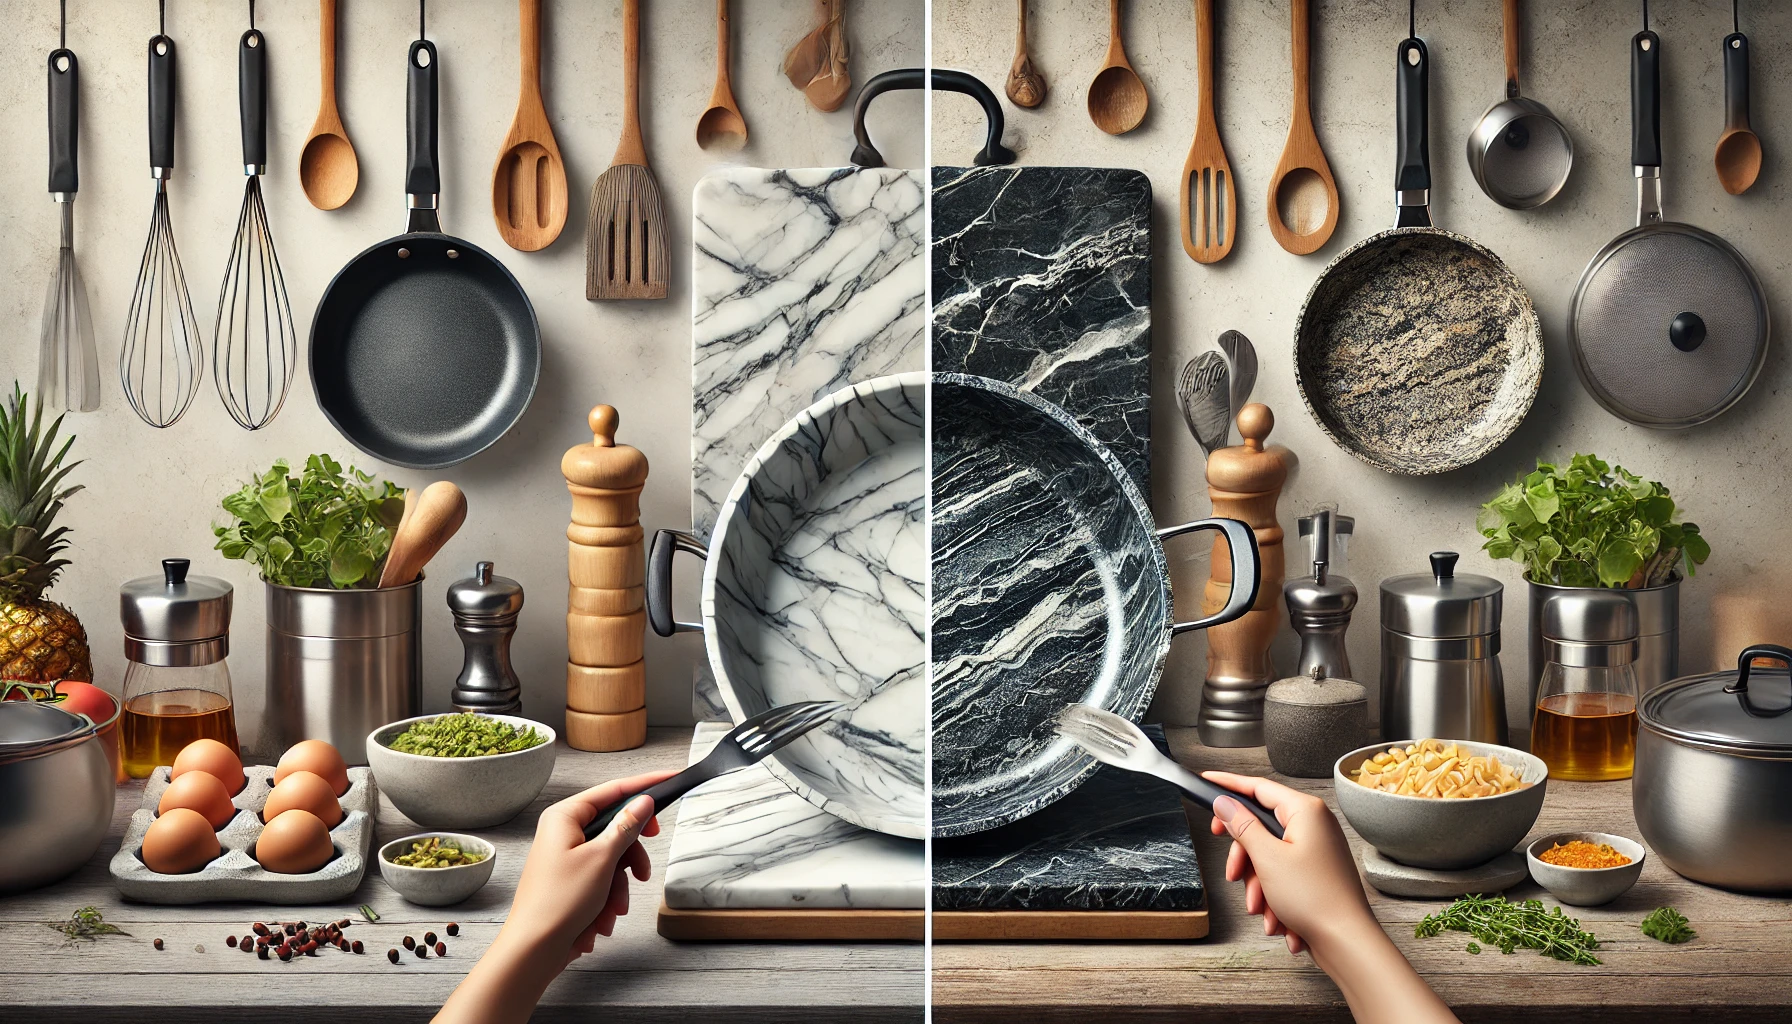 Is Marble Coating Better Than Granite Coating Cookware?